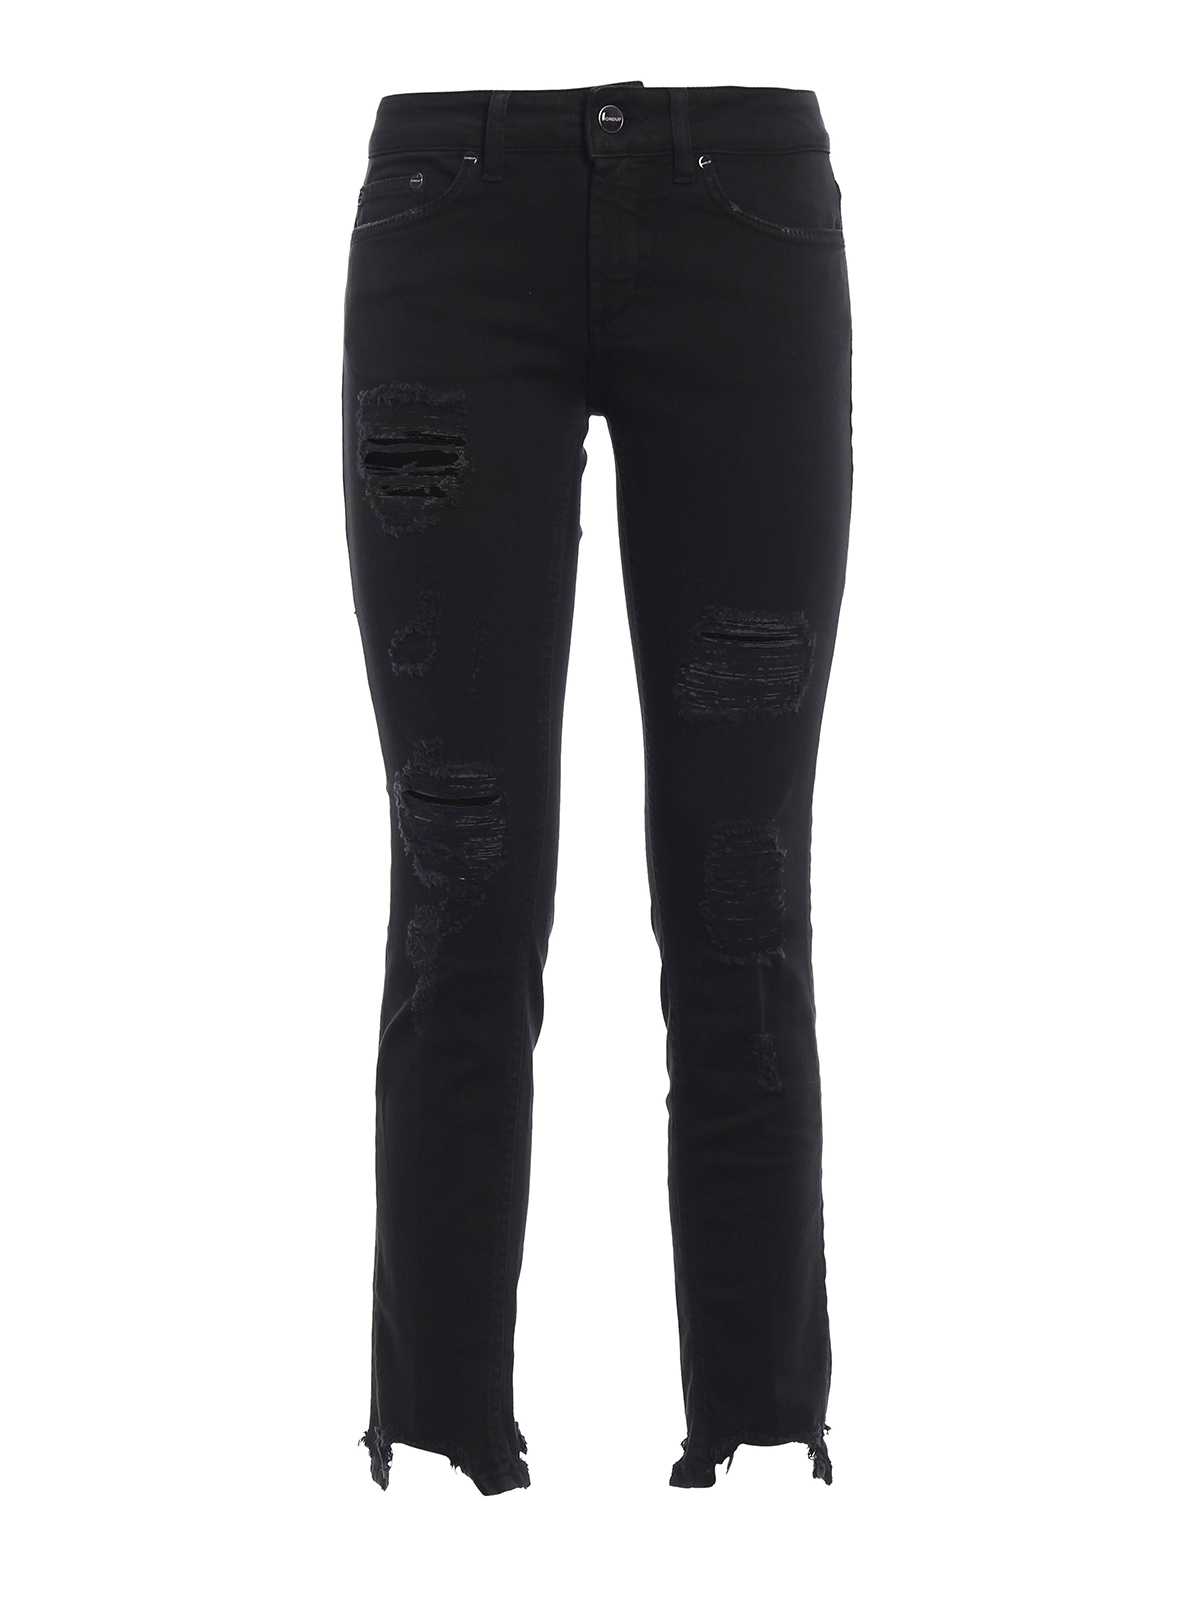 Skinny jeans Dondup - Monroe ripped jeans - P692BS009DR23999 | iKRIX.com